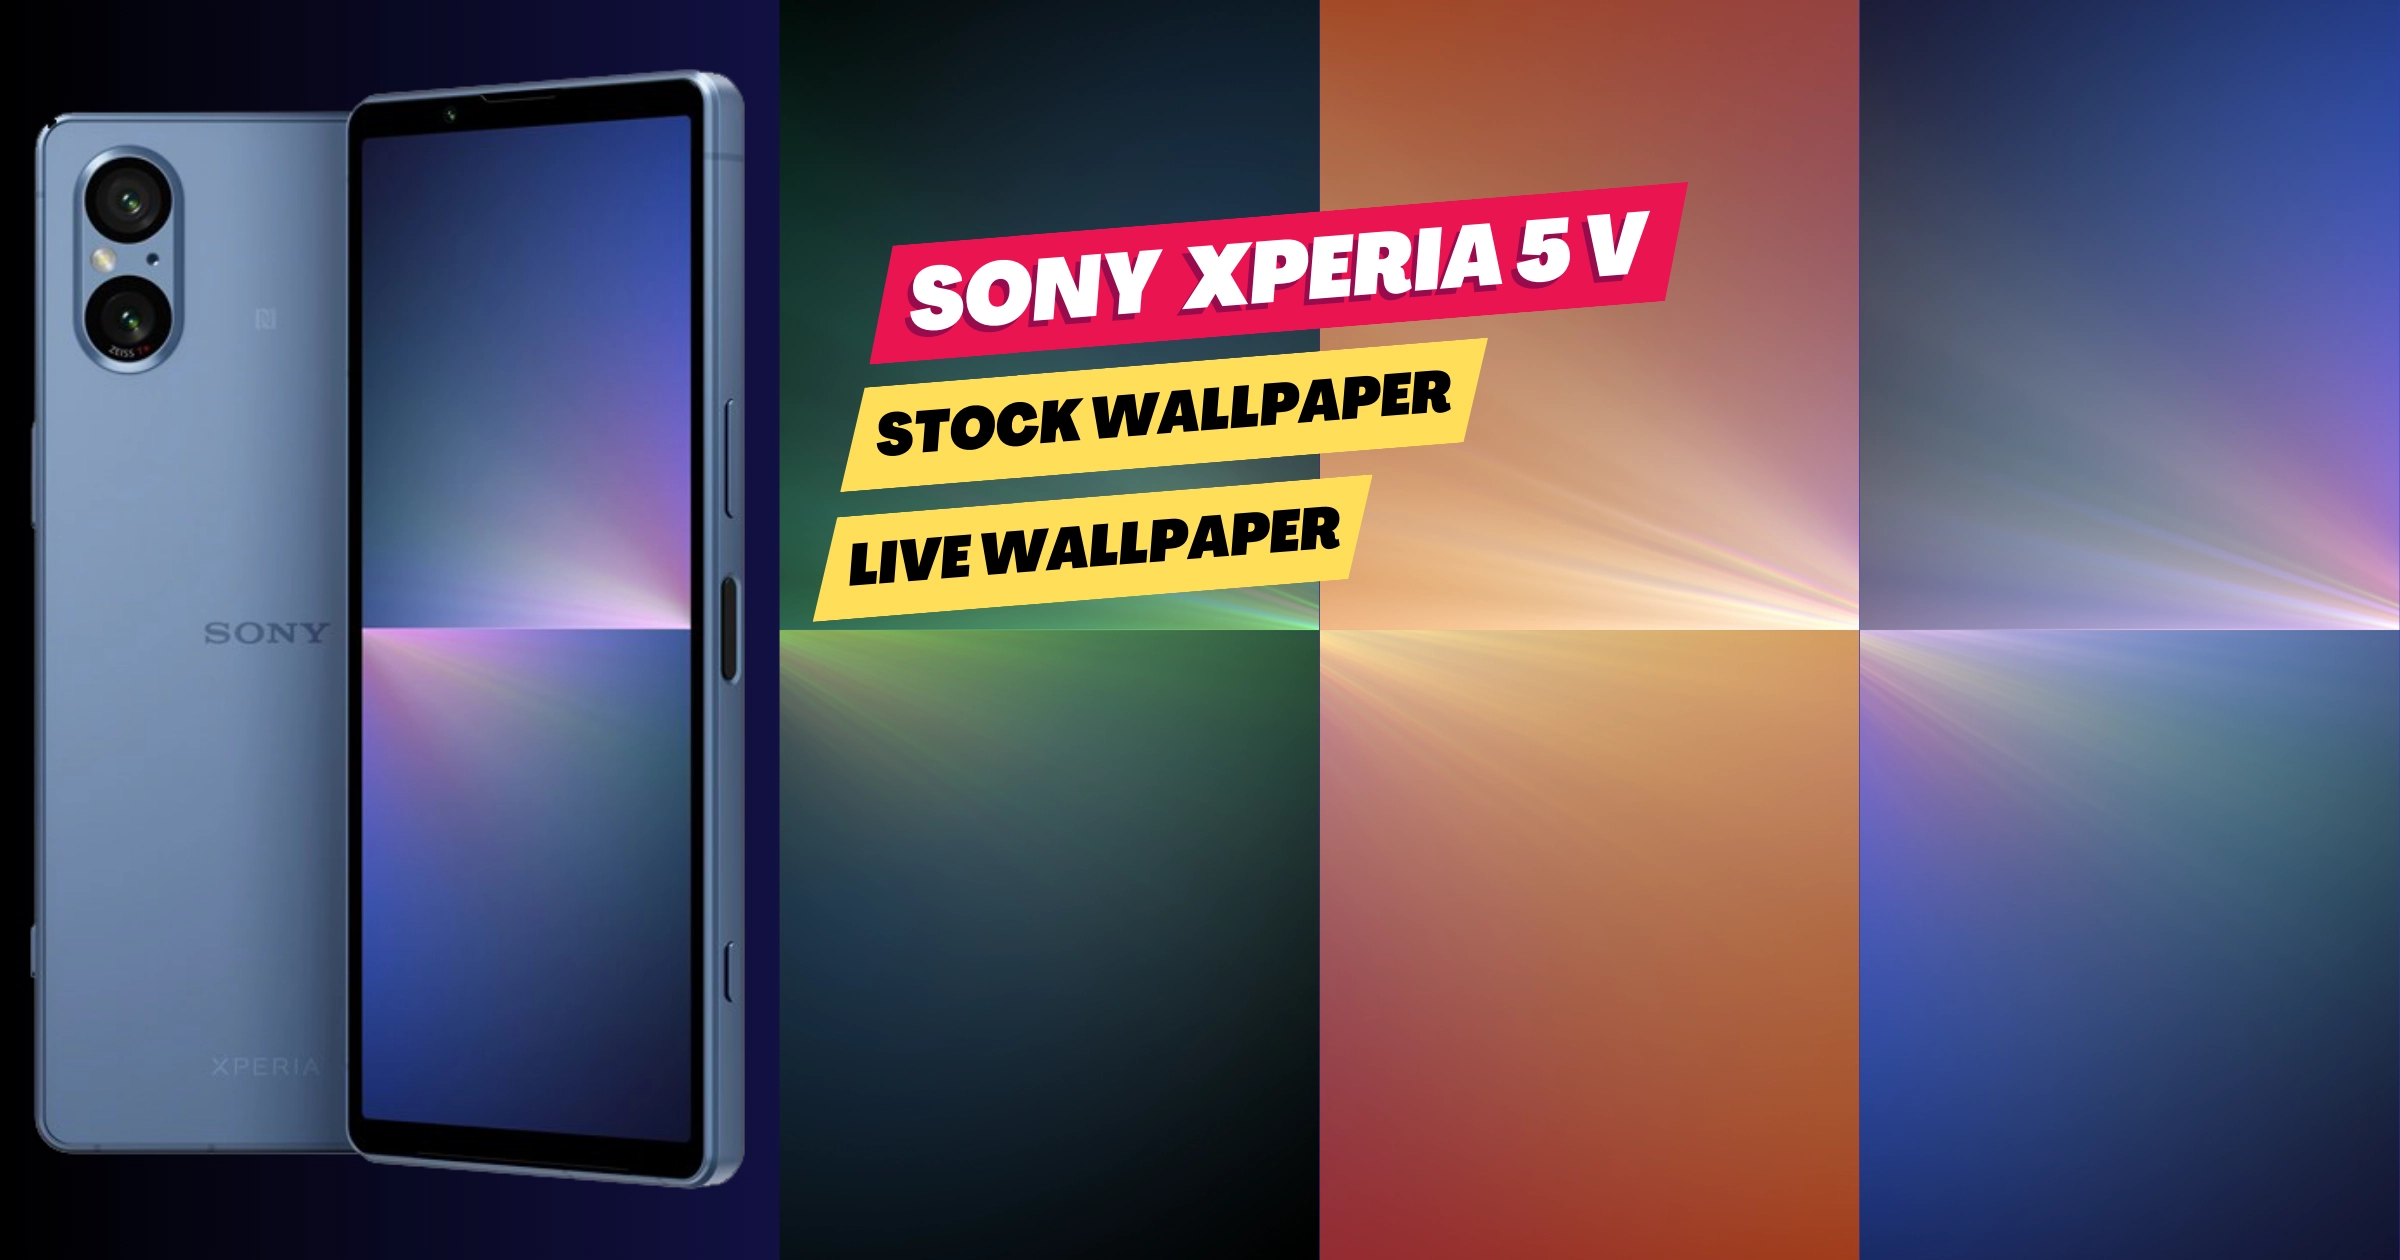 Download Sony Xperia 5 V Stock and Live Wallpapers [FHD+]